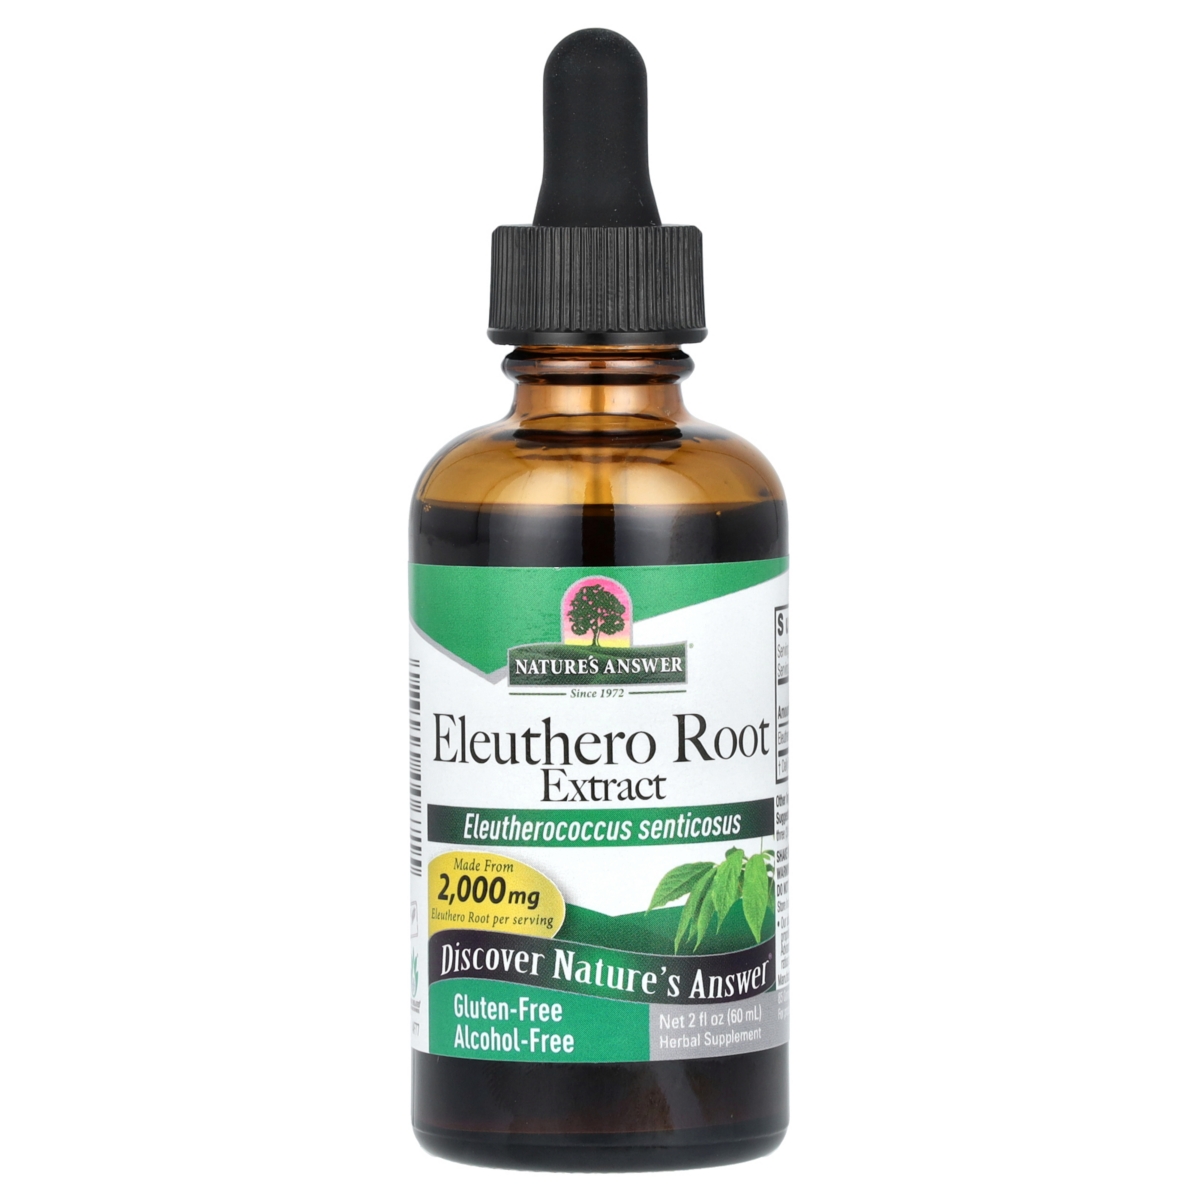 Eleuthero Root Extract Alcohol-Free 2 000 mg - 2 fl oz (60 ml) - Assorted Pre-pack (See Table